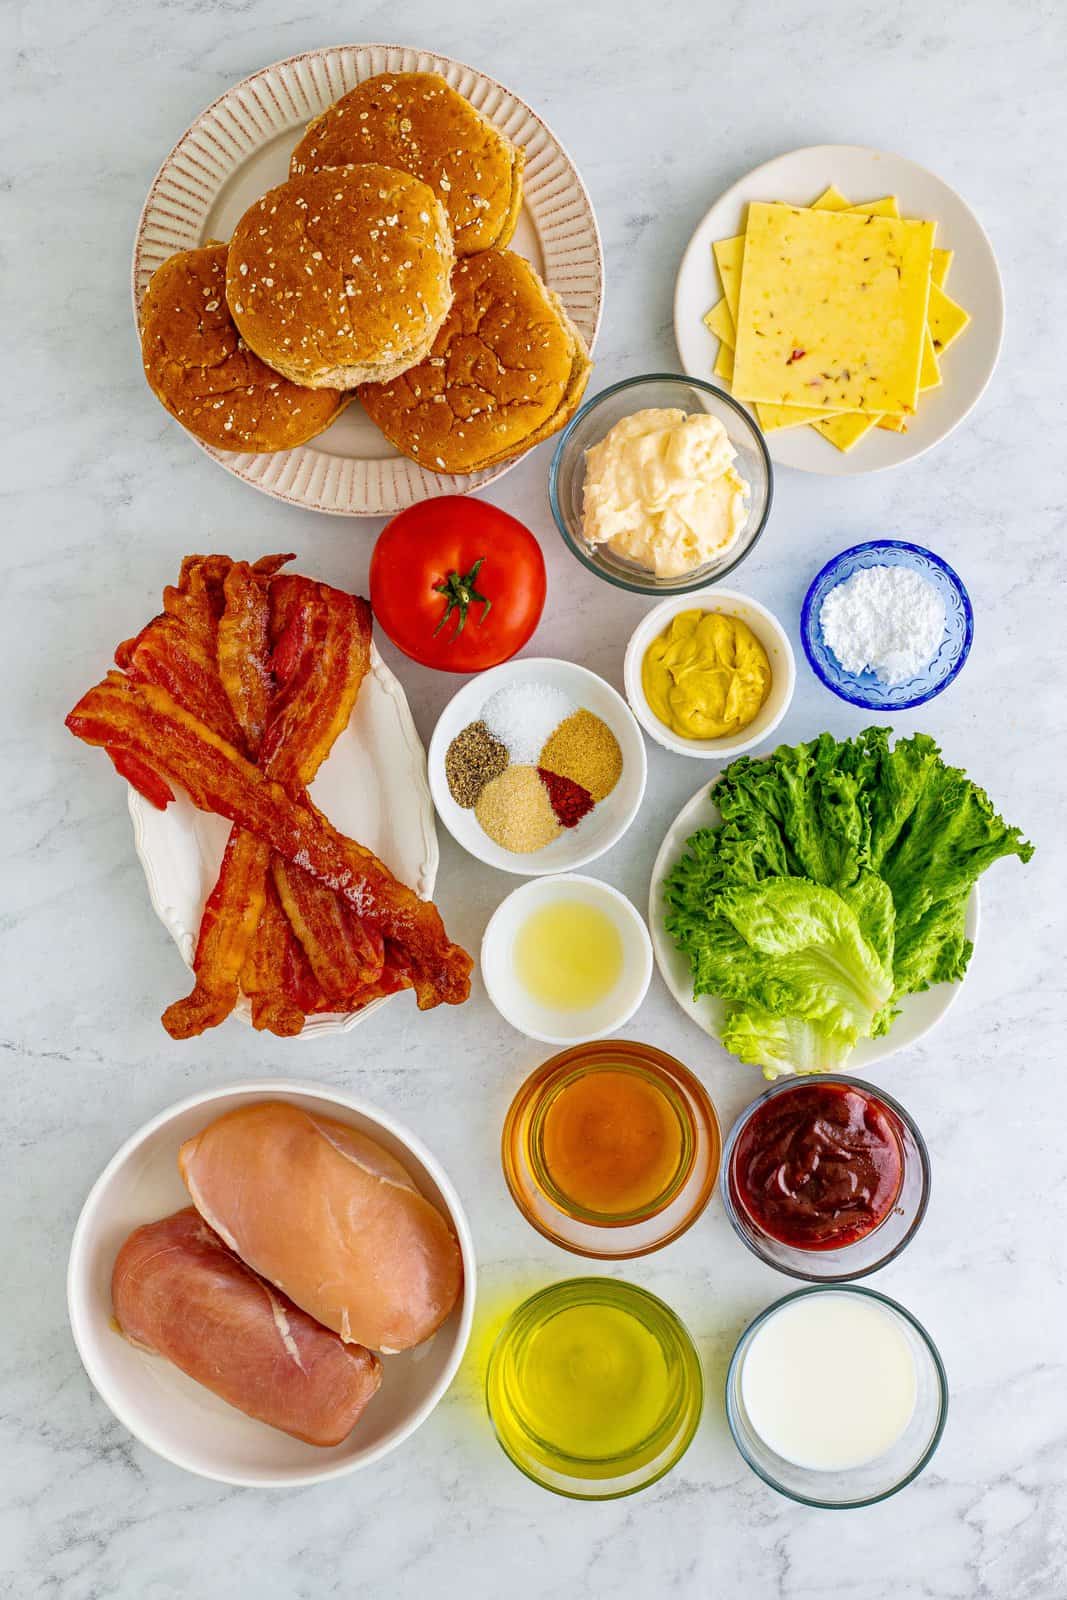 Ingredients needed: chicken breasts, dill pickle juice, whole milk, powdered sugar, garlic powder, onion powder, pepper, kosher salt, smoked paprika, mayonnaise, sweet bbq sauce, honey, dijon mustard, lemon juice, pepper jack or colby jack cheese, multigrain buns, green leaf lettuce, beefsteak tomato slices and applewood smoked bacon.